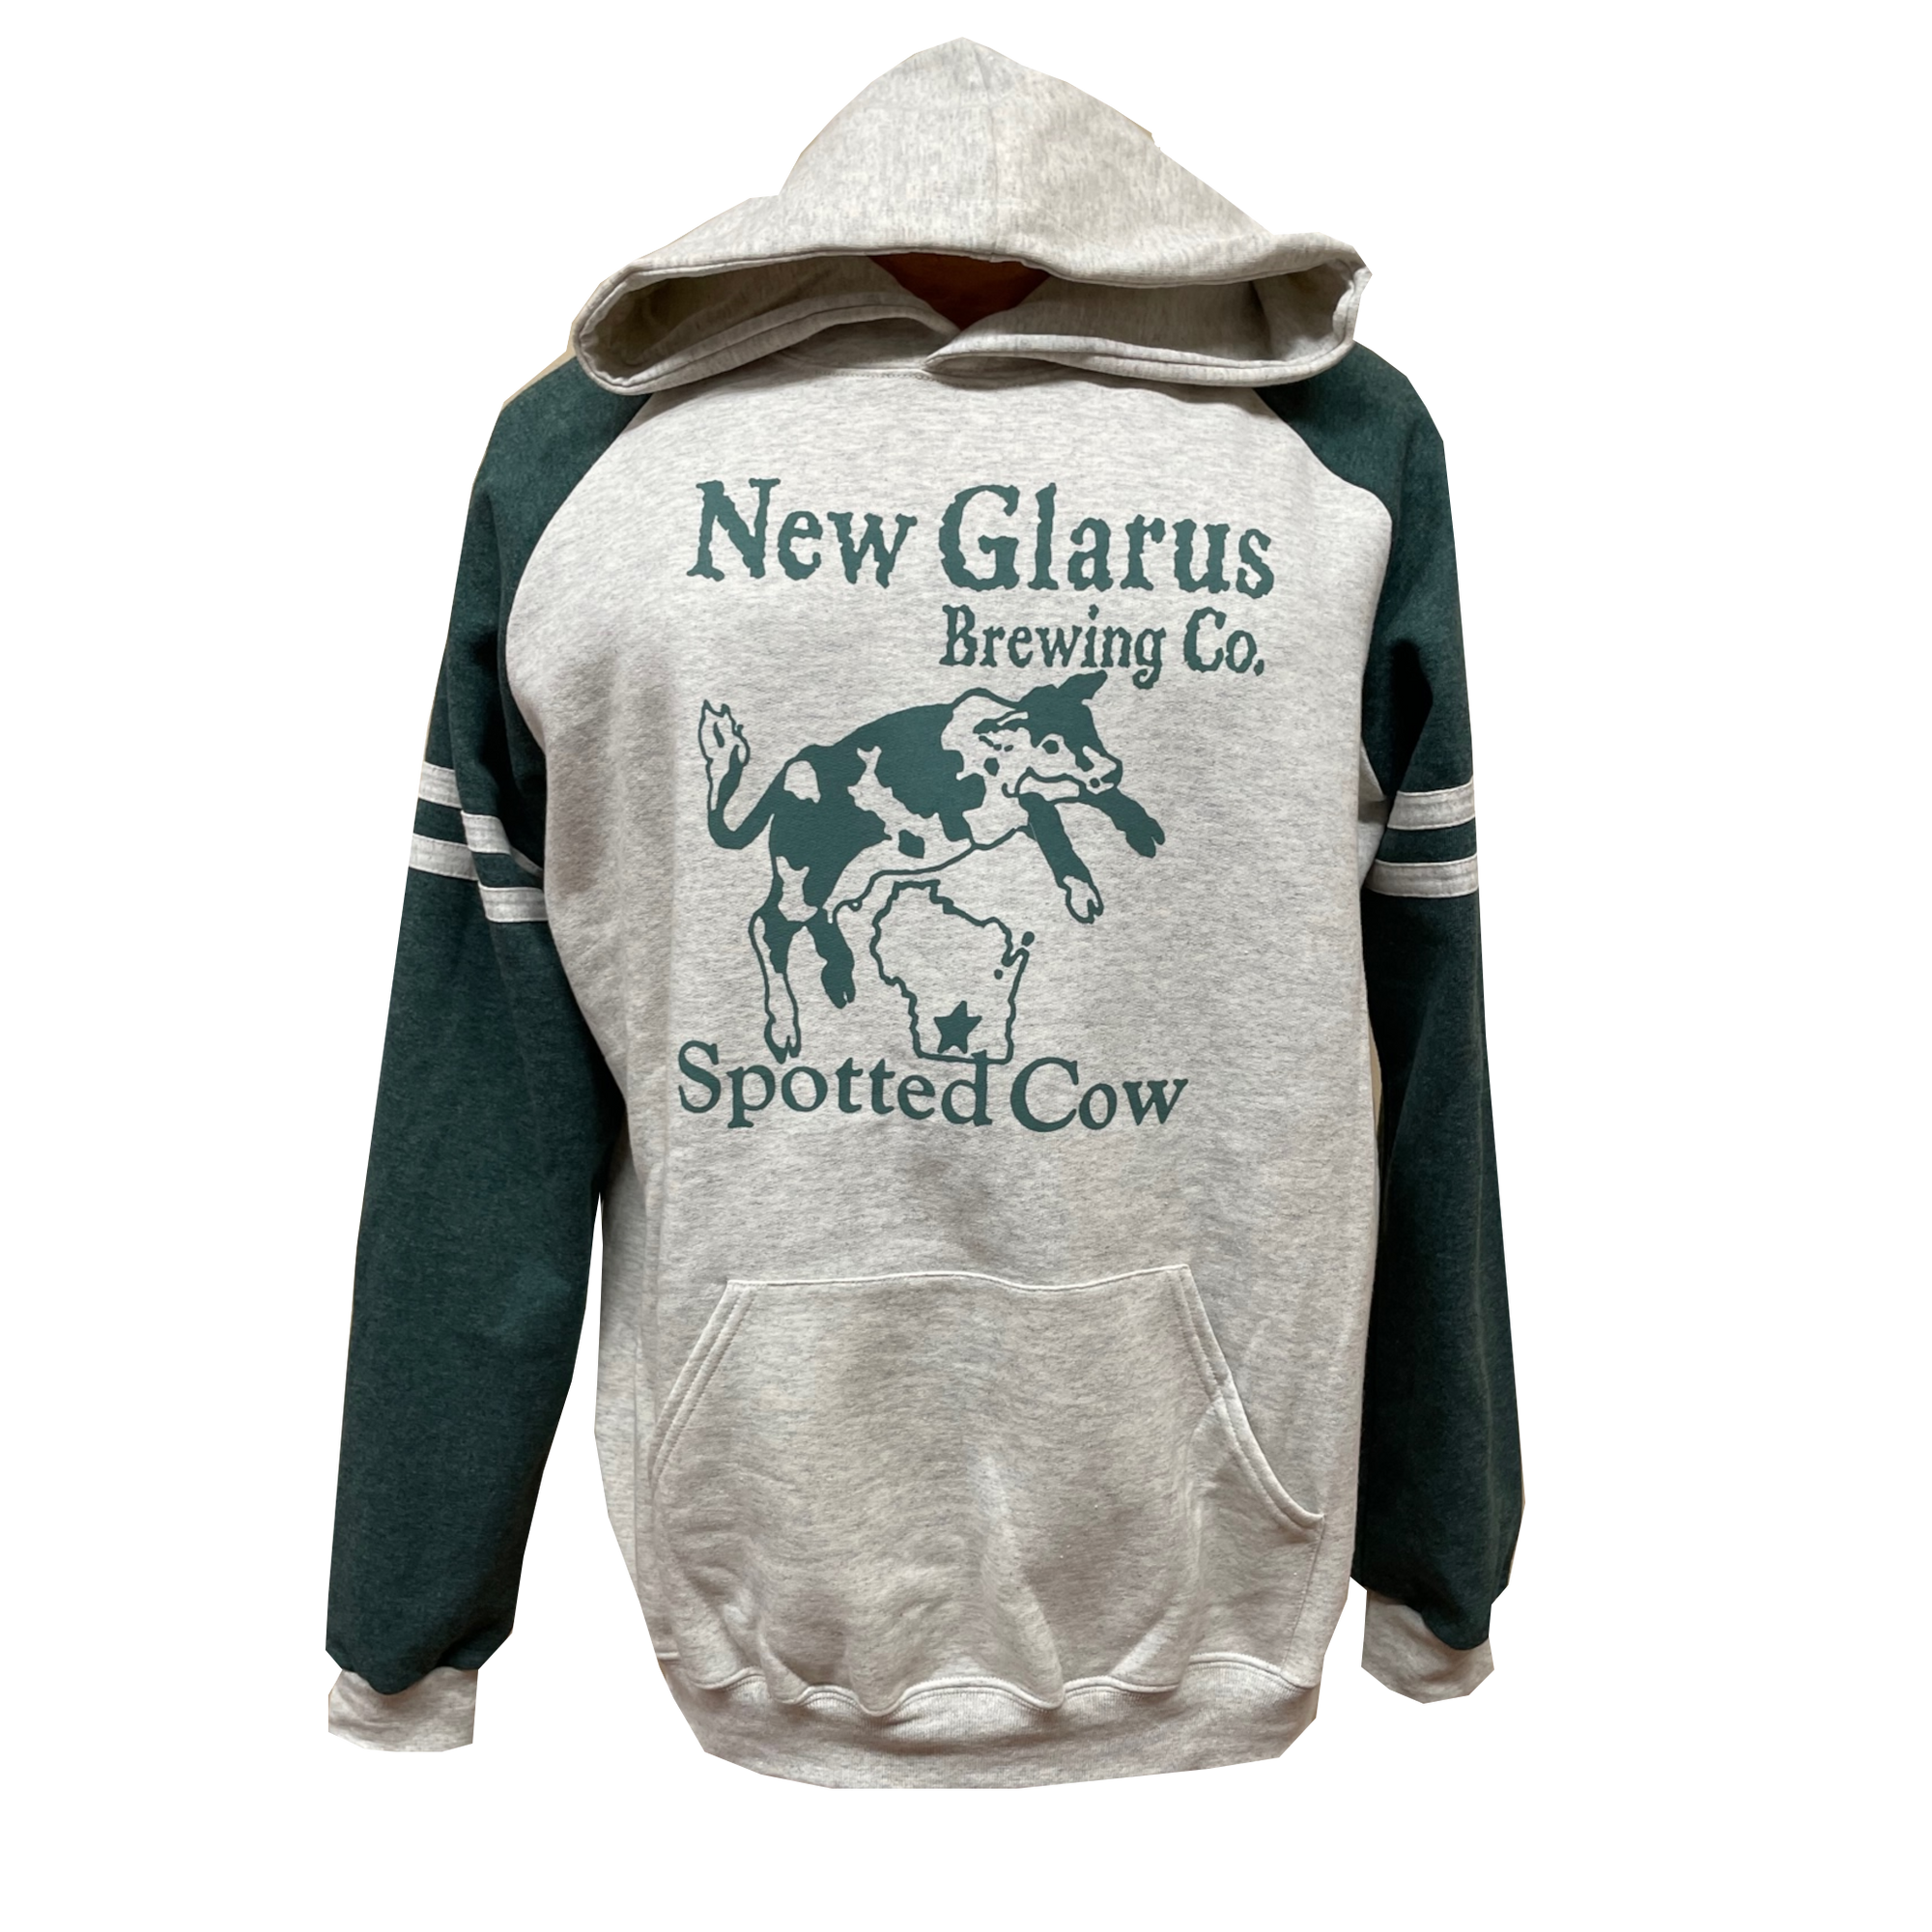 Light grey hooded sweatshirt with forest green raglan sleeves and two grey stripes around each sleeve. Features the Spotted Cow logo in greeen on the front.